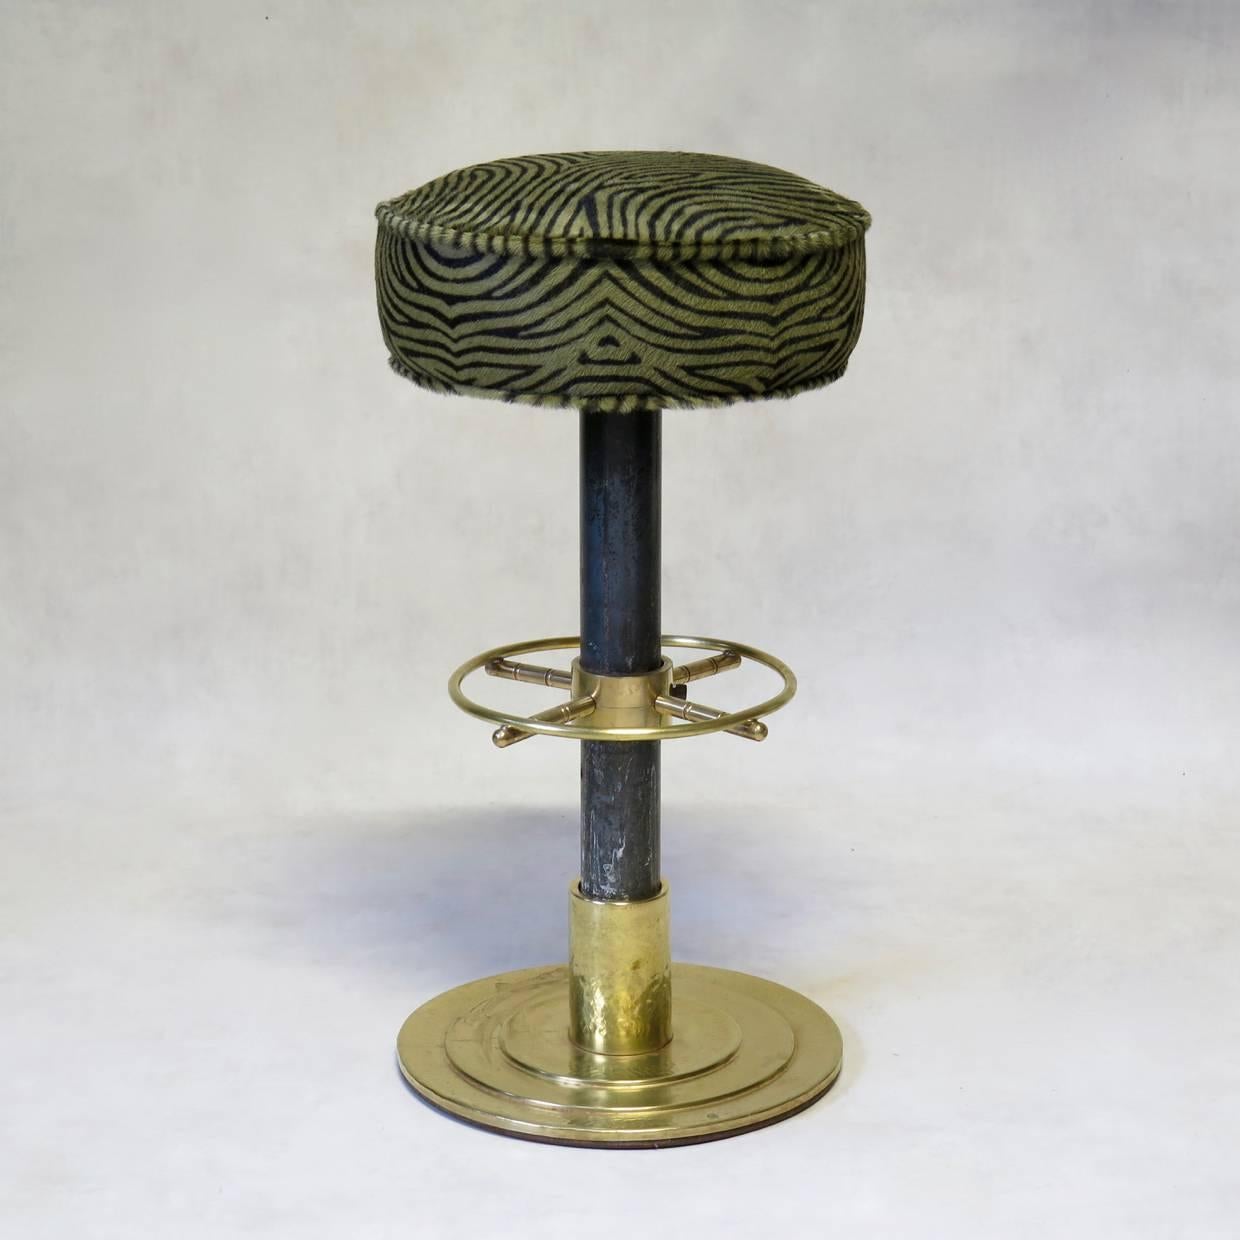 Nice-quality stool, with brass details. The stepped base is made of hammered brass, and the foot rail, fashioned like a boat wheel, is solid brass. The seat is upholstered in faux-zebra calf hair. From a boat. Very heavy-based.